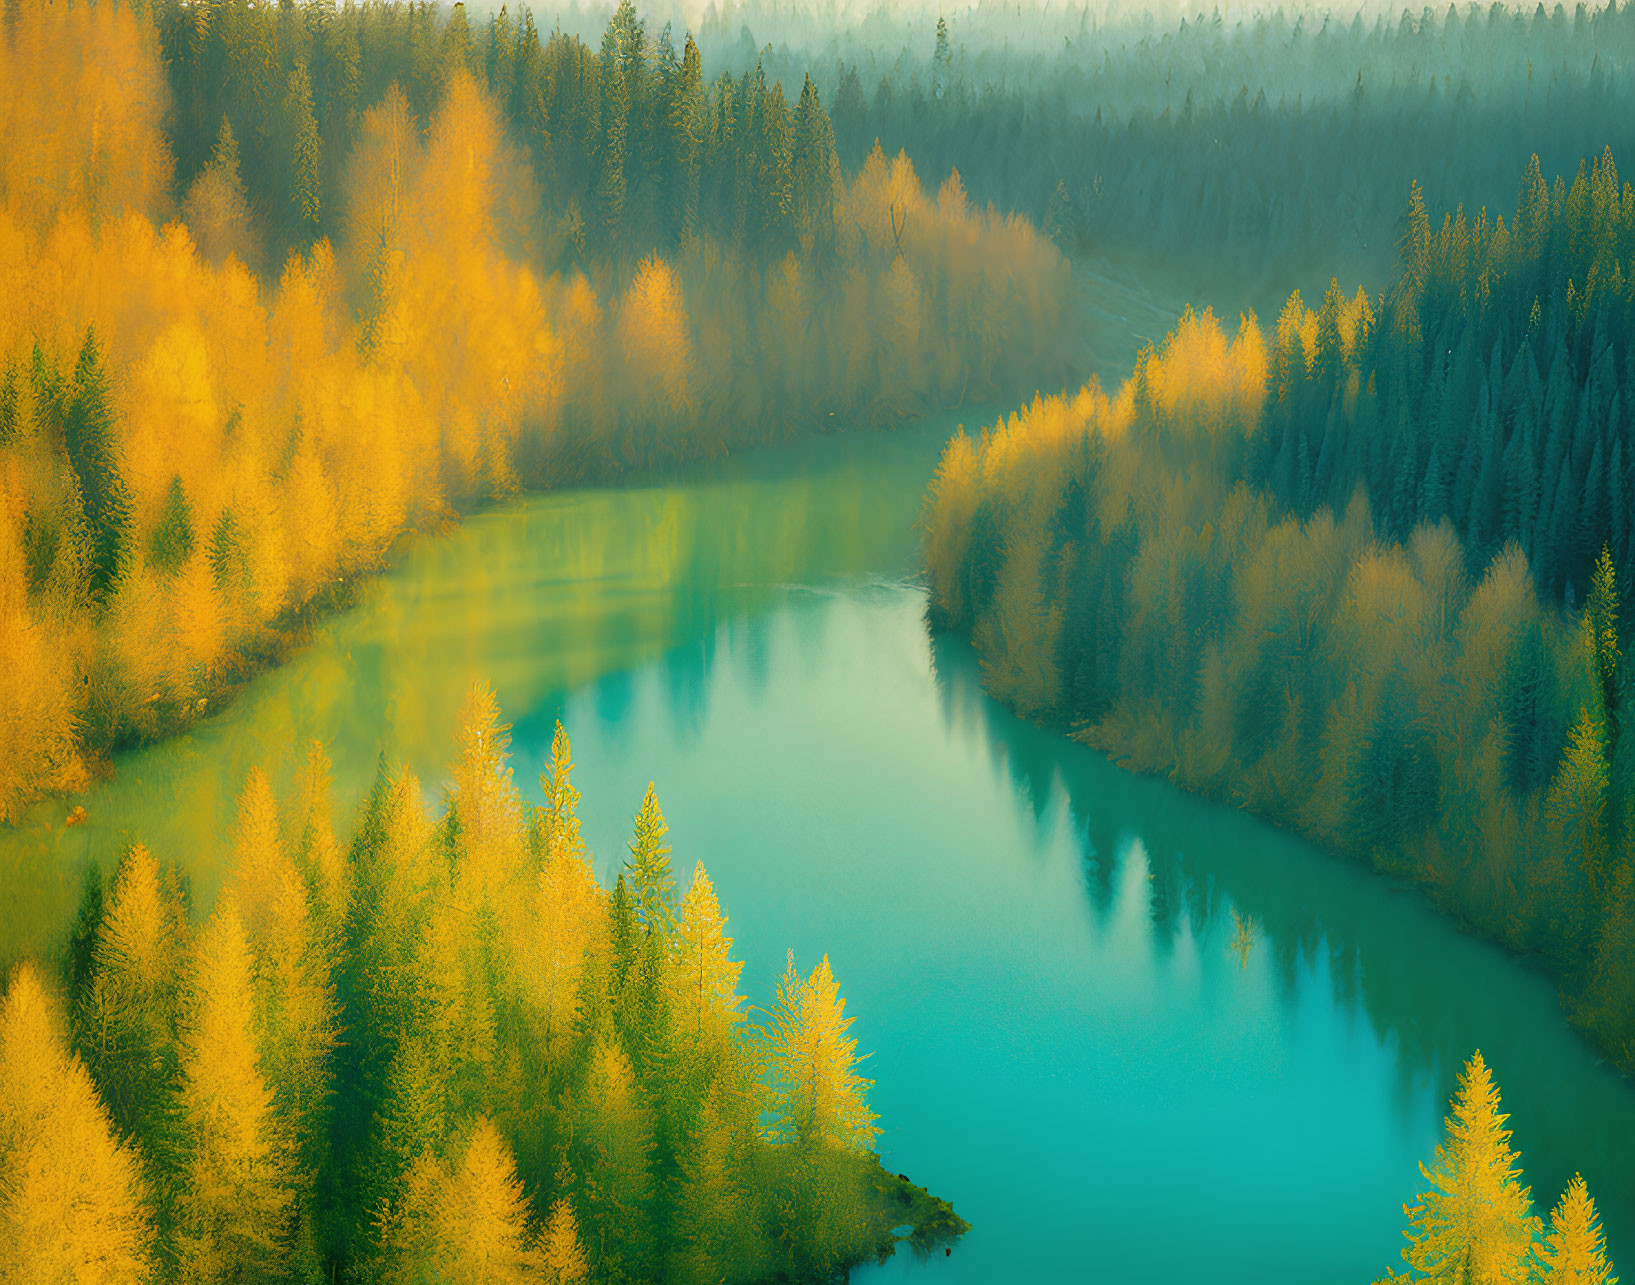 Autumn forest with winding river and colorful foliage